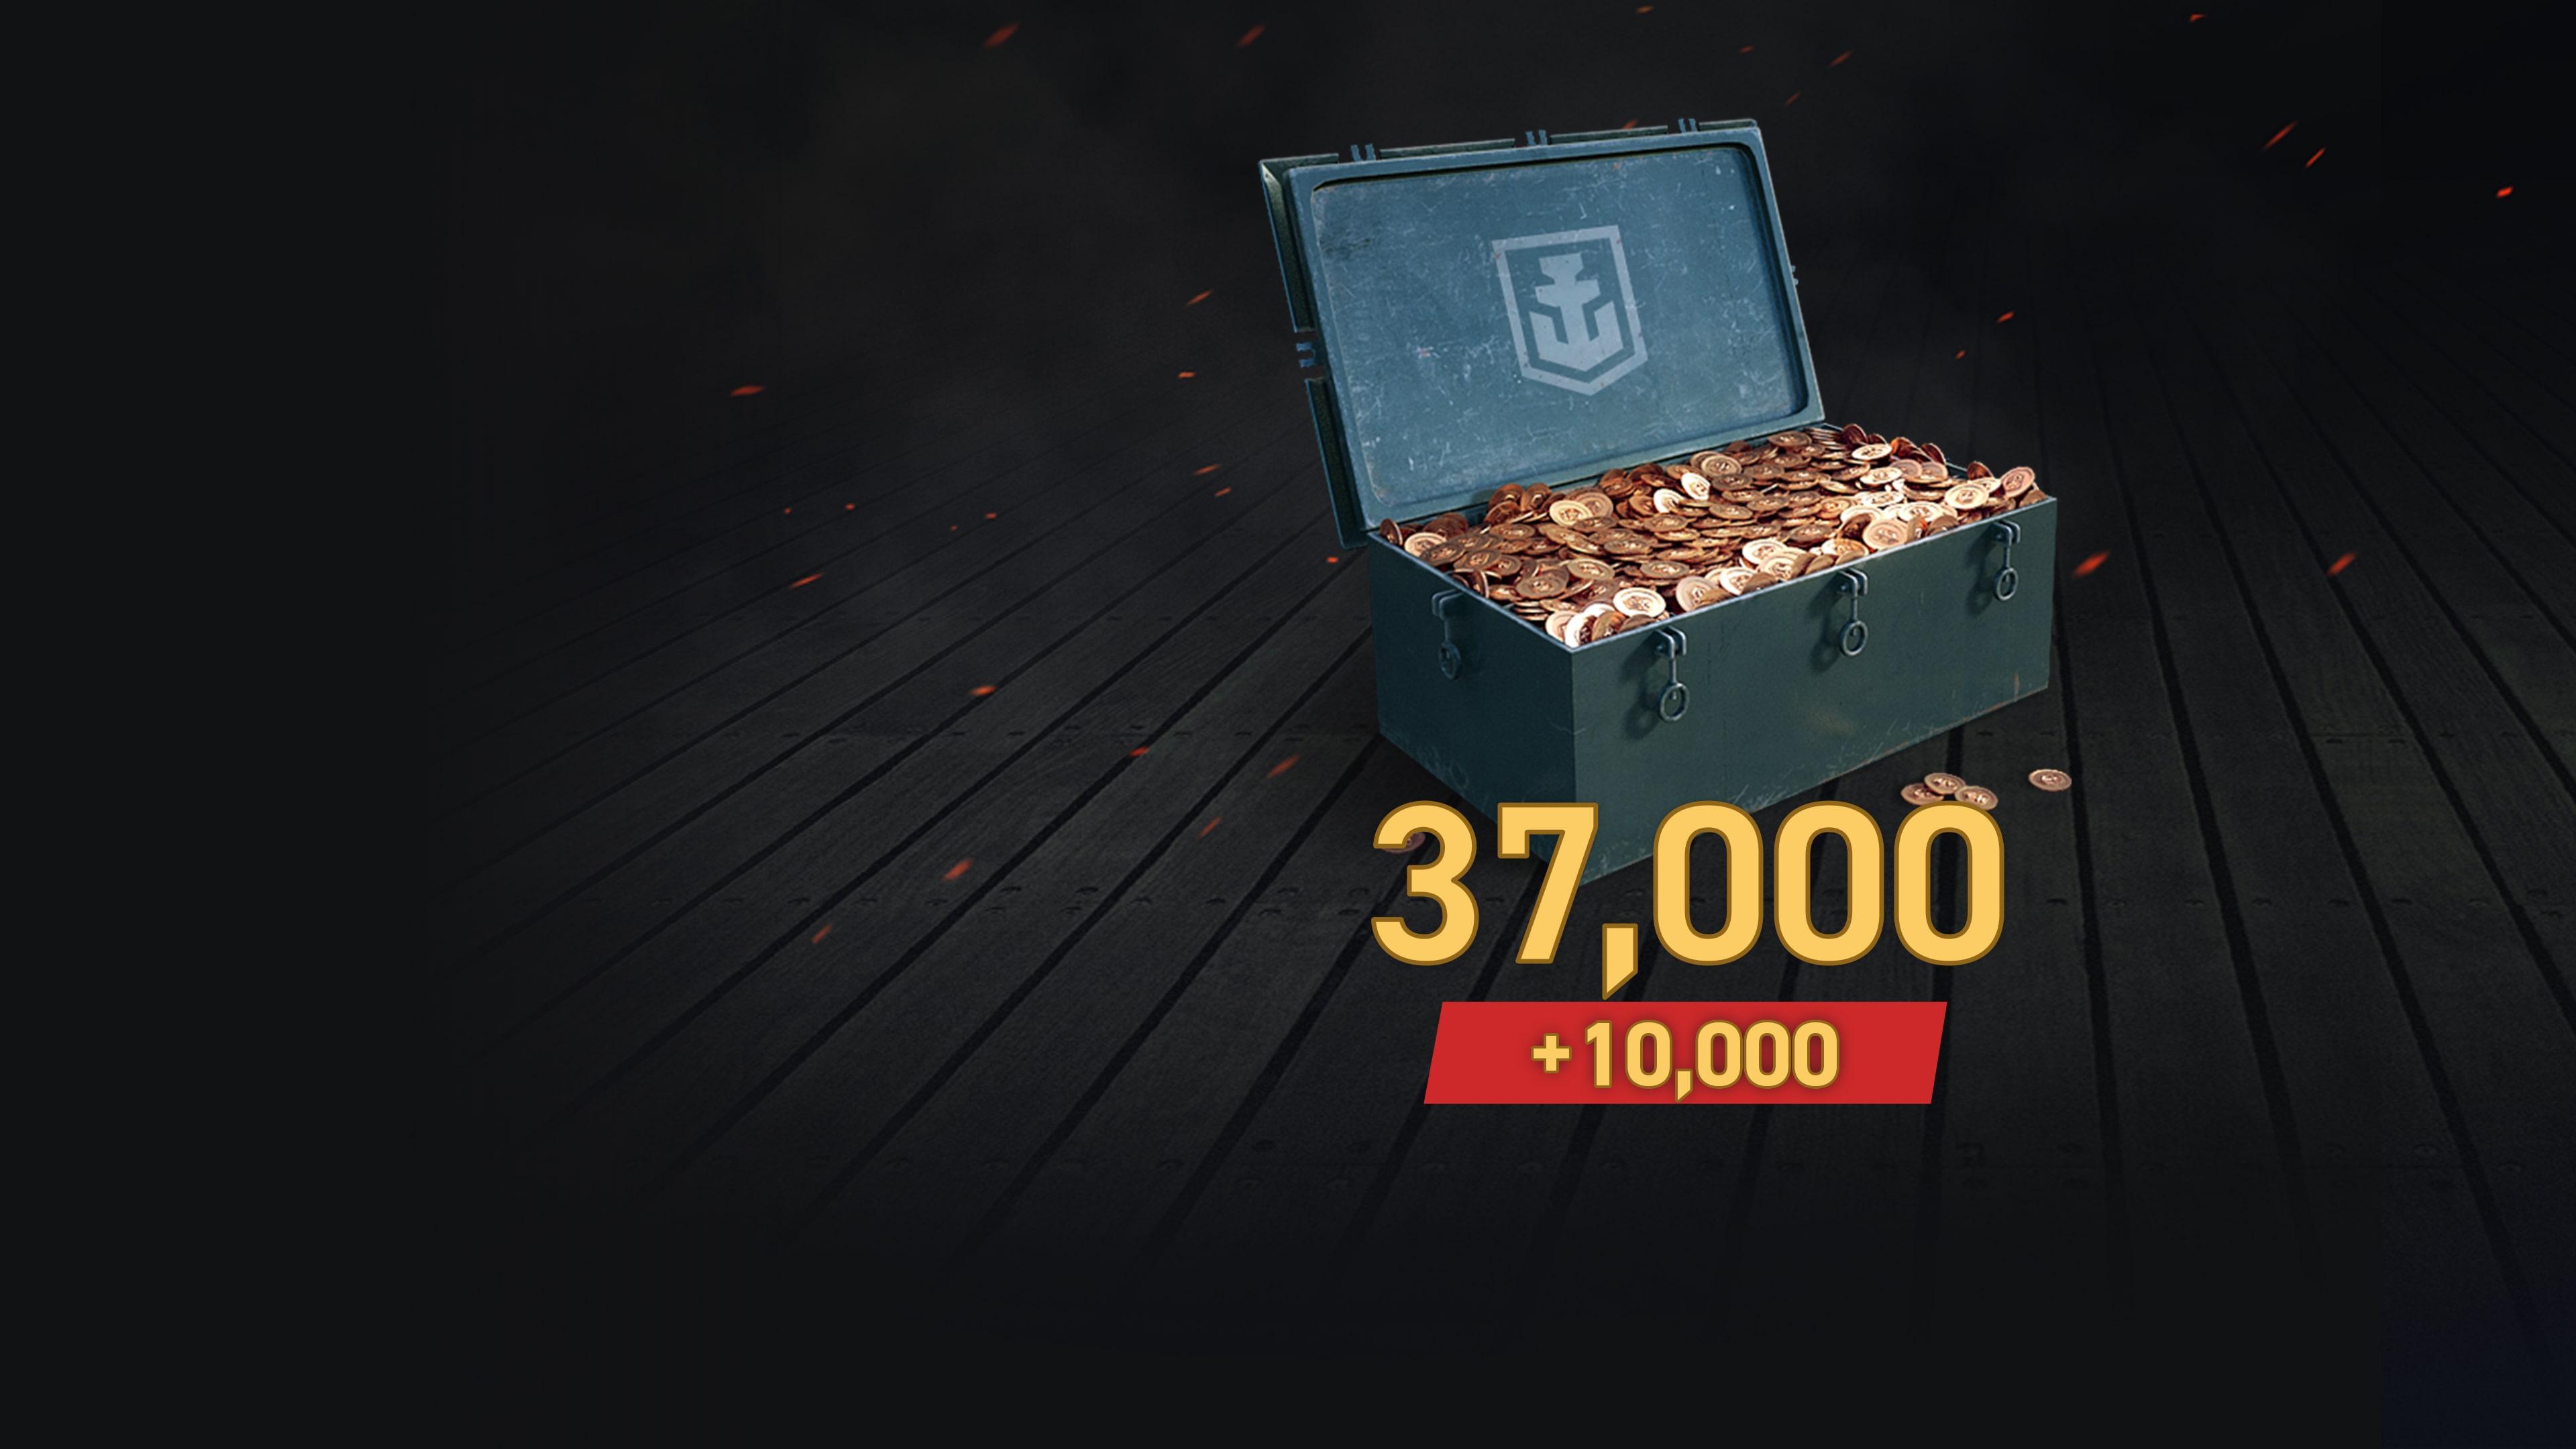 World of Warships: Legends - 47,000 Doubloons PS4